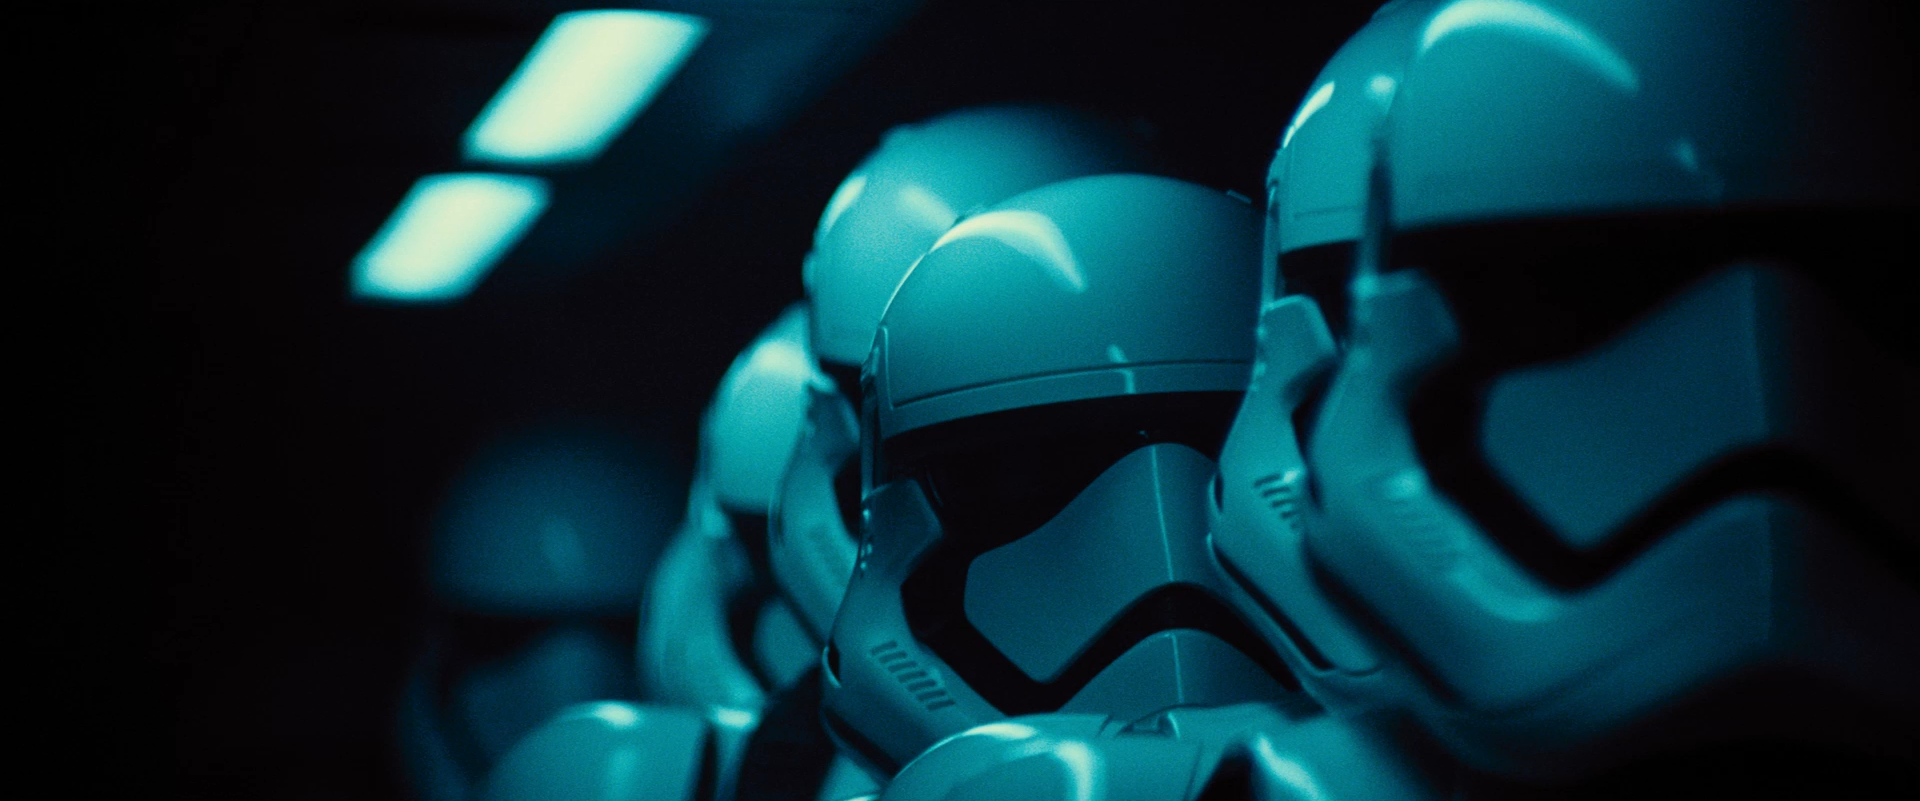 311 Stormtrooper Hd Wallpapers Background Images Wallpaper Abyss